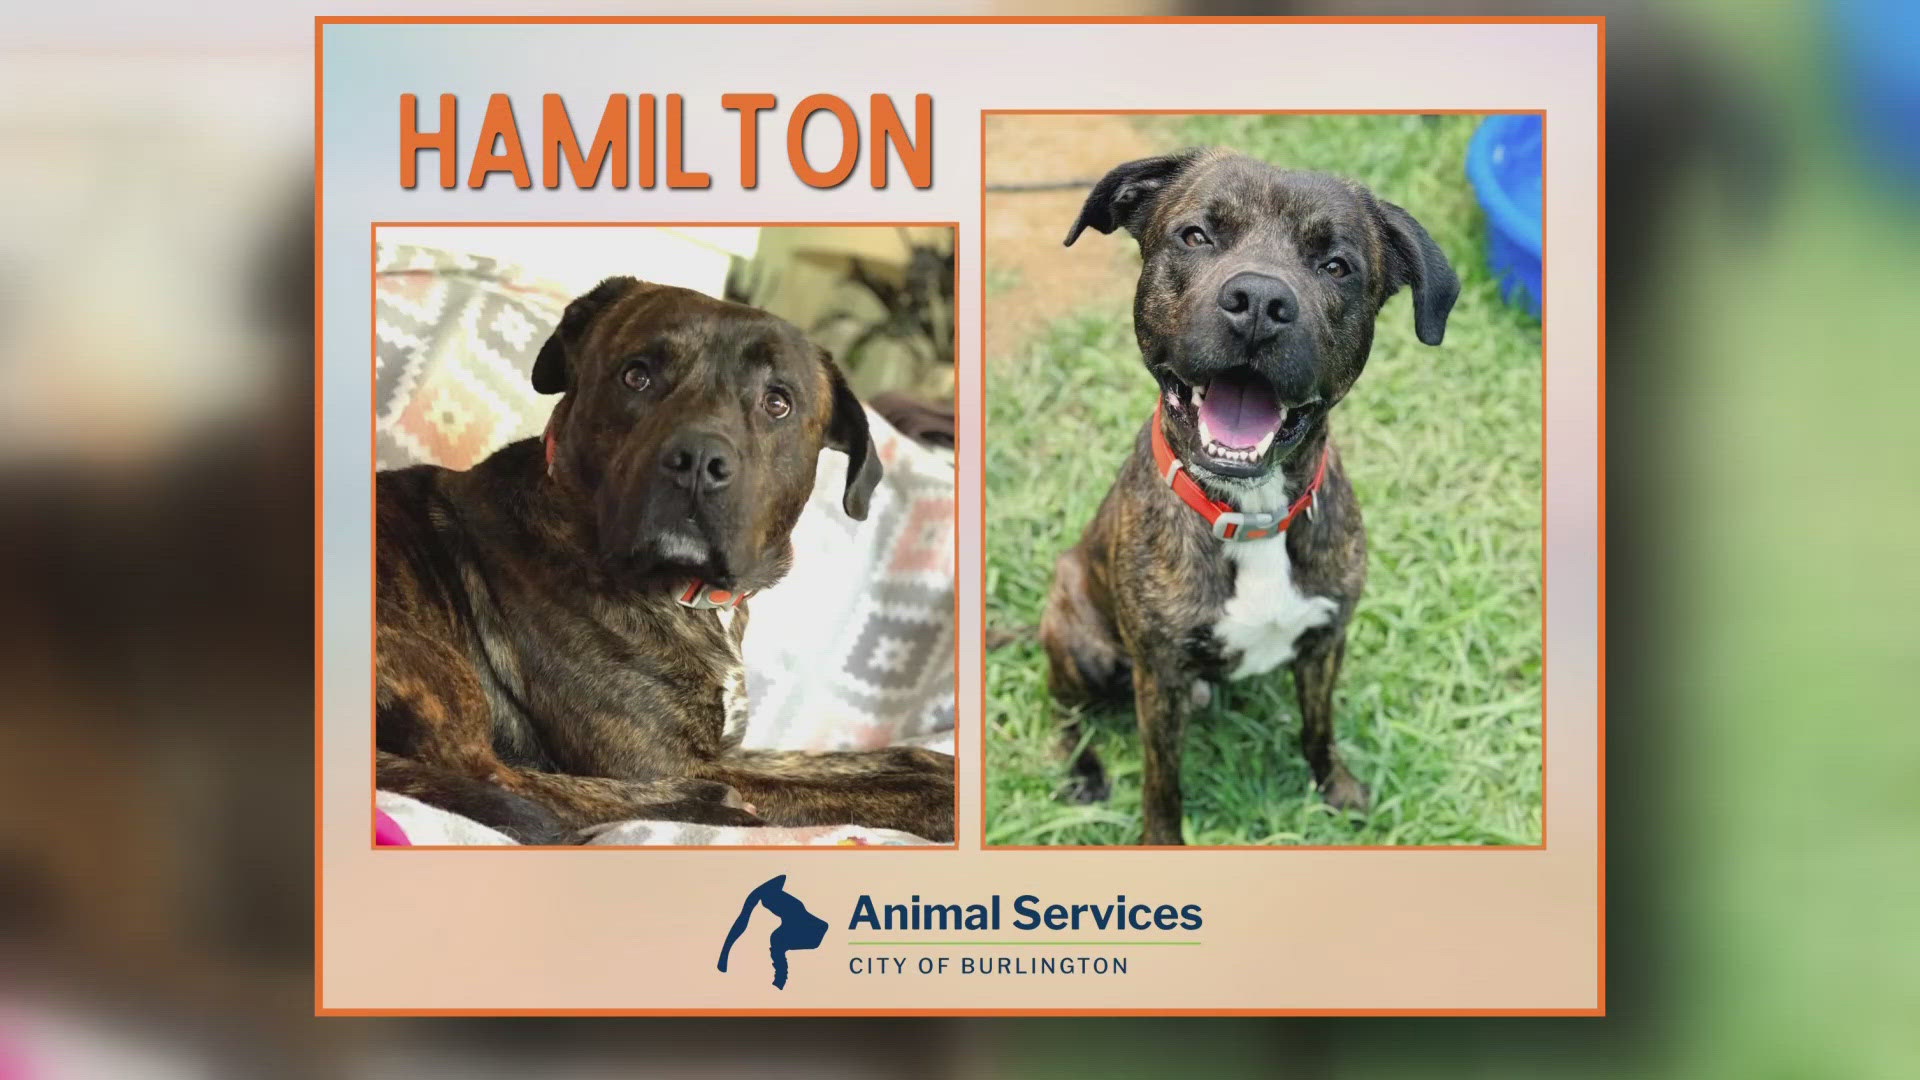 Let's get Hamilton adopted!